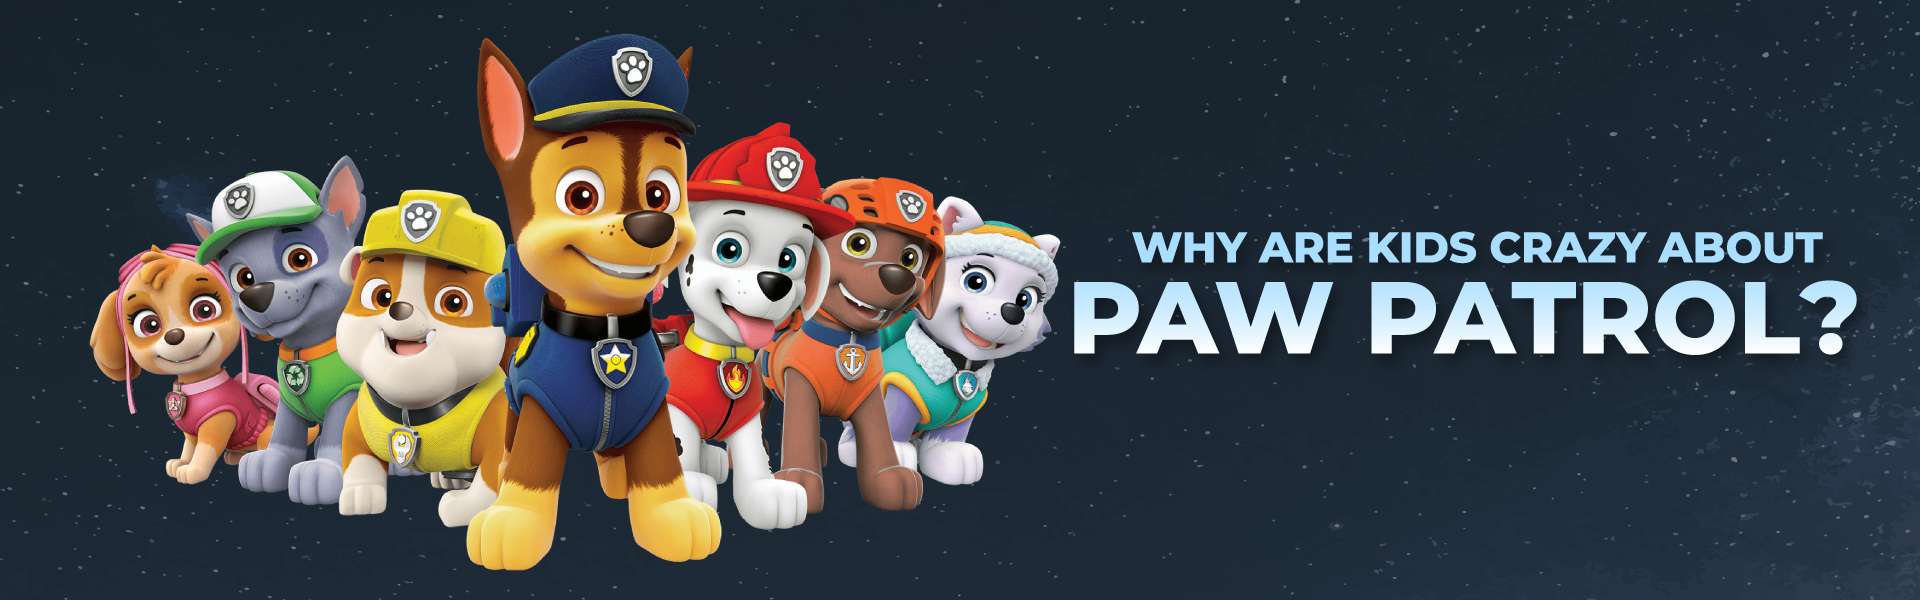 Why are Kids crazy about Paw Patrol 